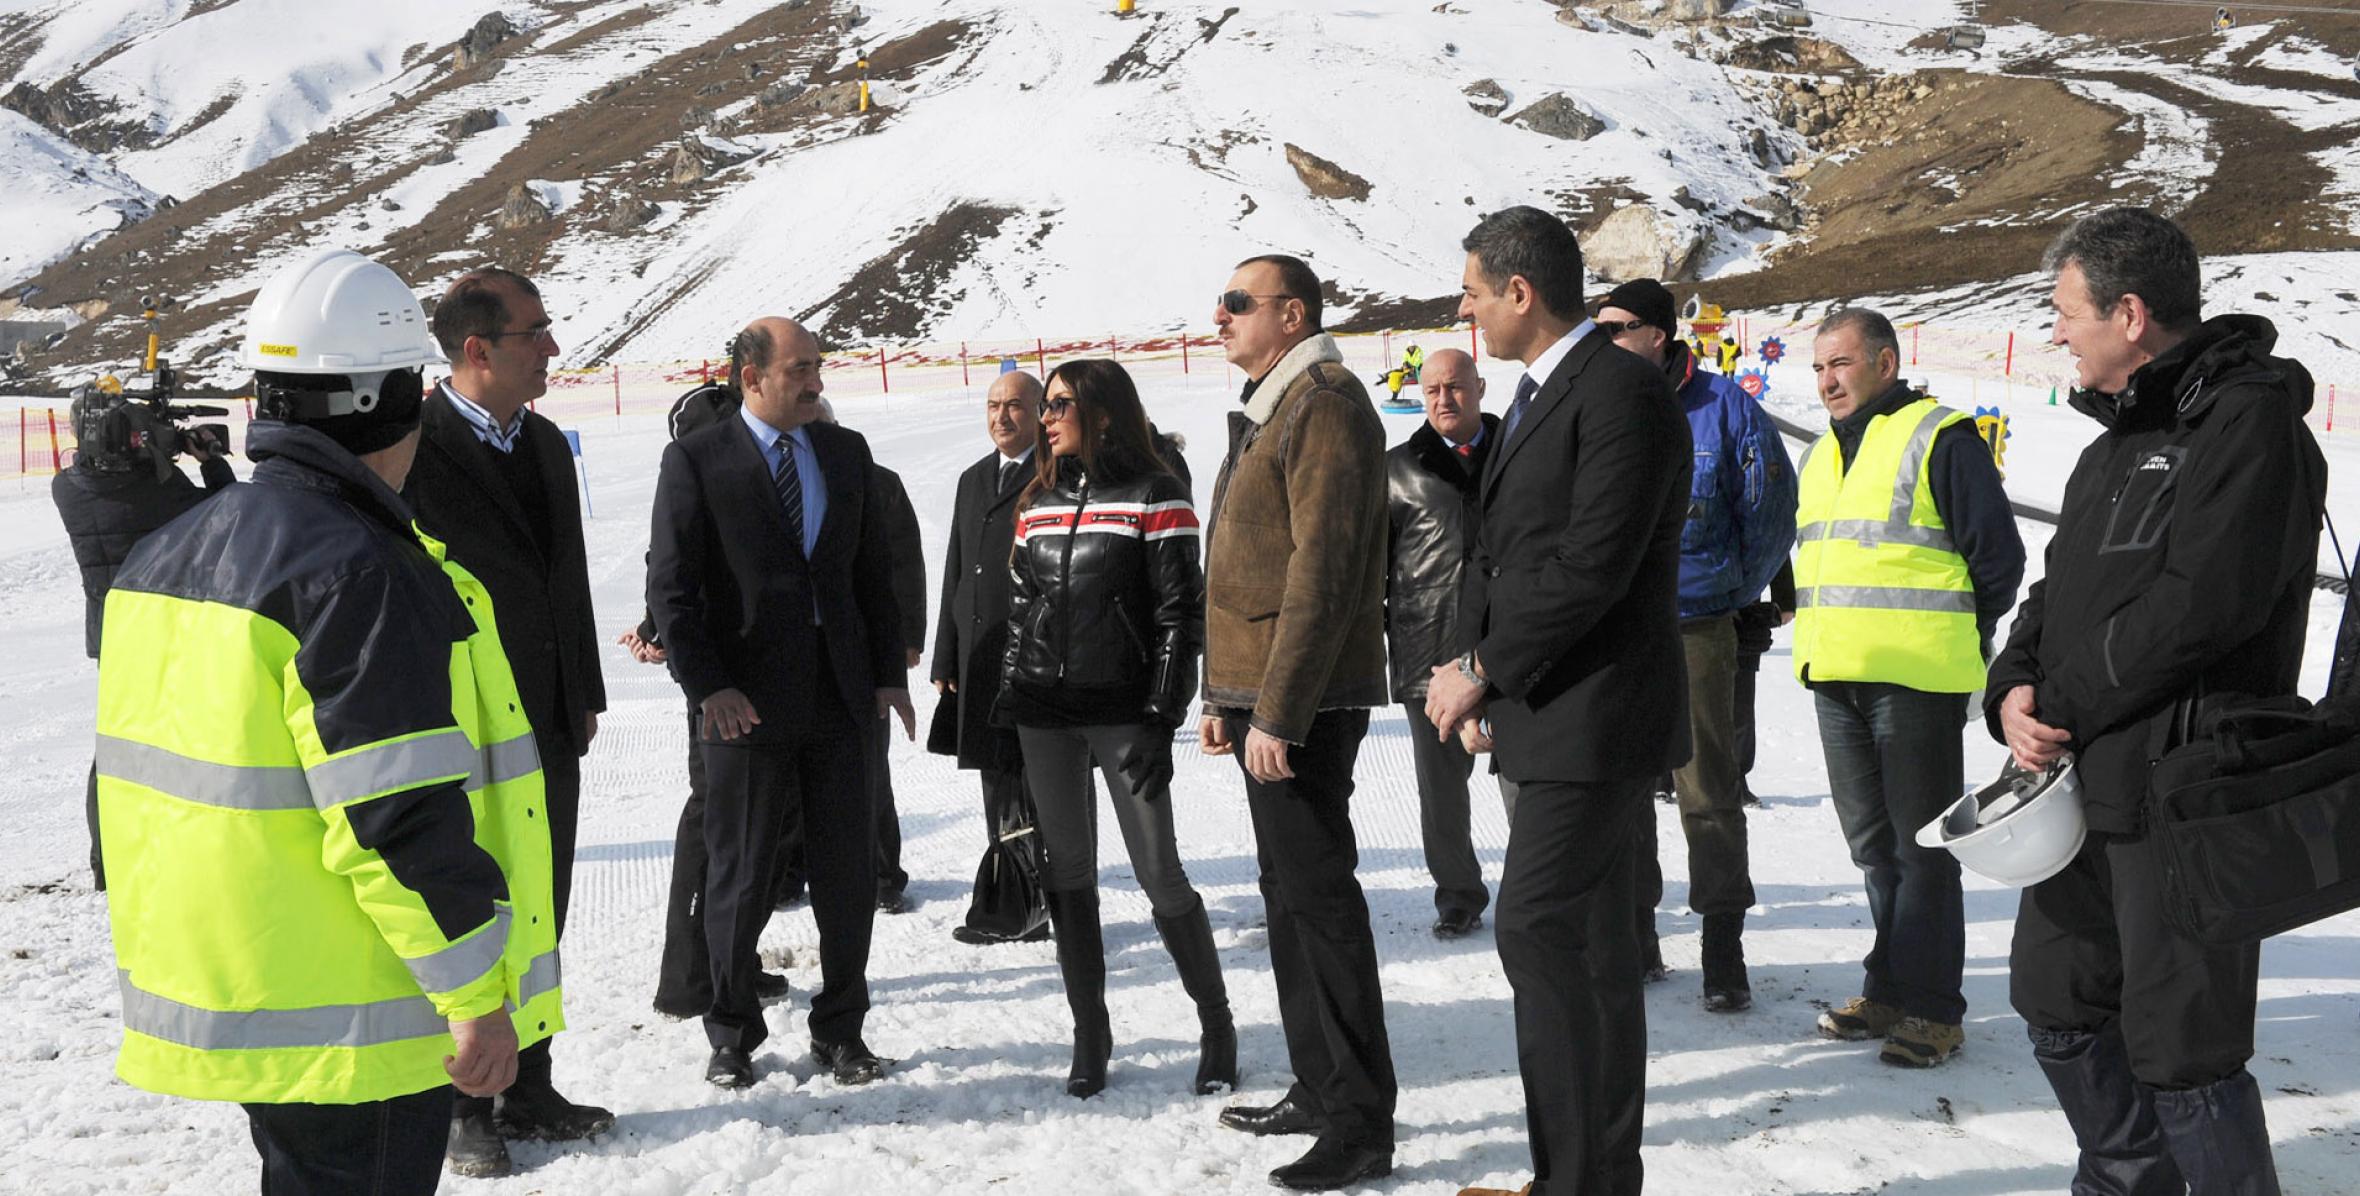 Ilham Aliyev reviewed the final phase of the first stage in the construction of the Shahdag winter and summer tourism complex